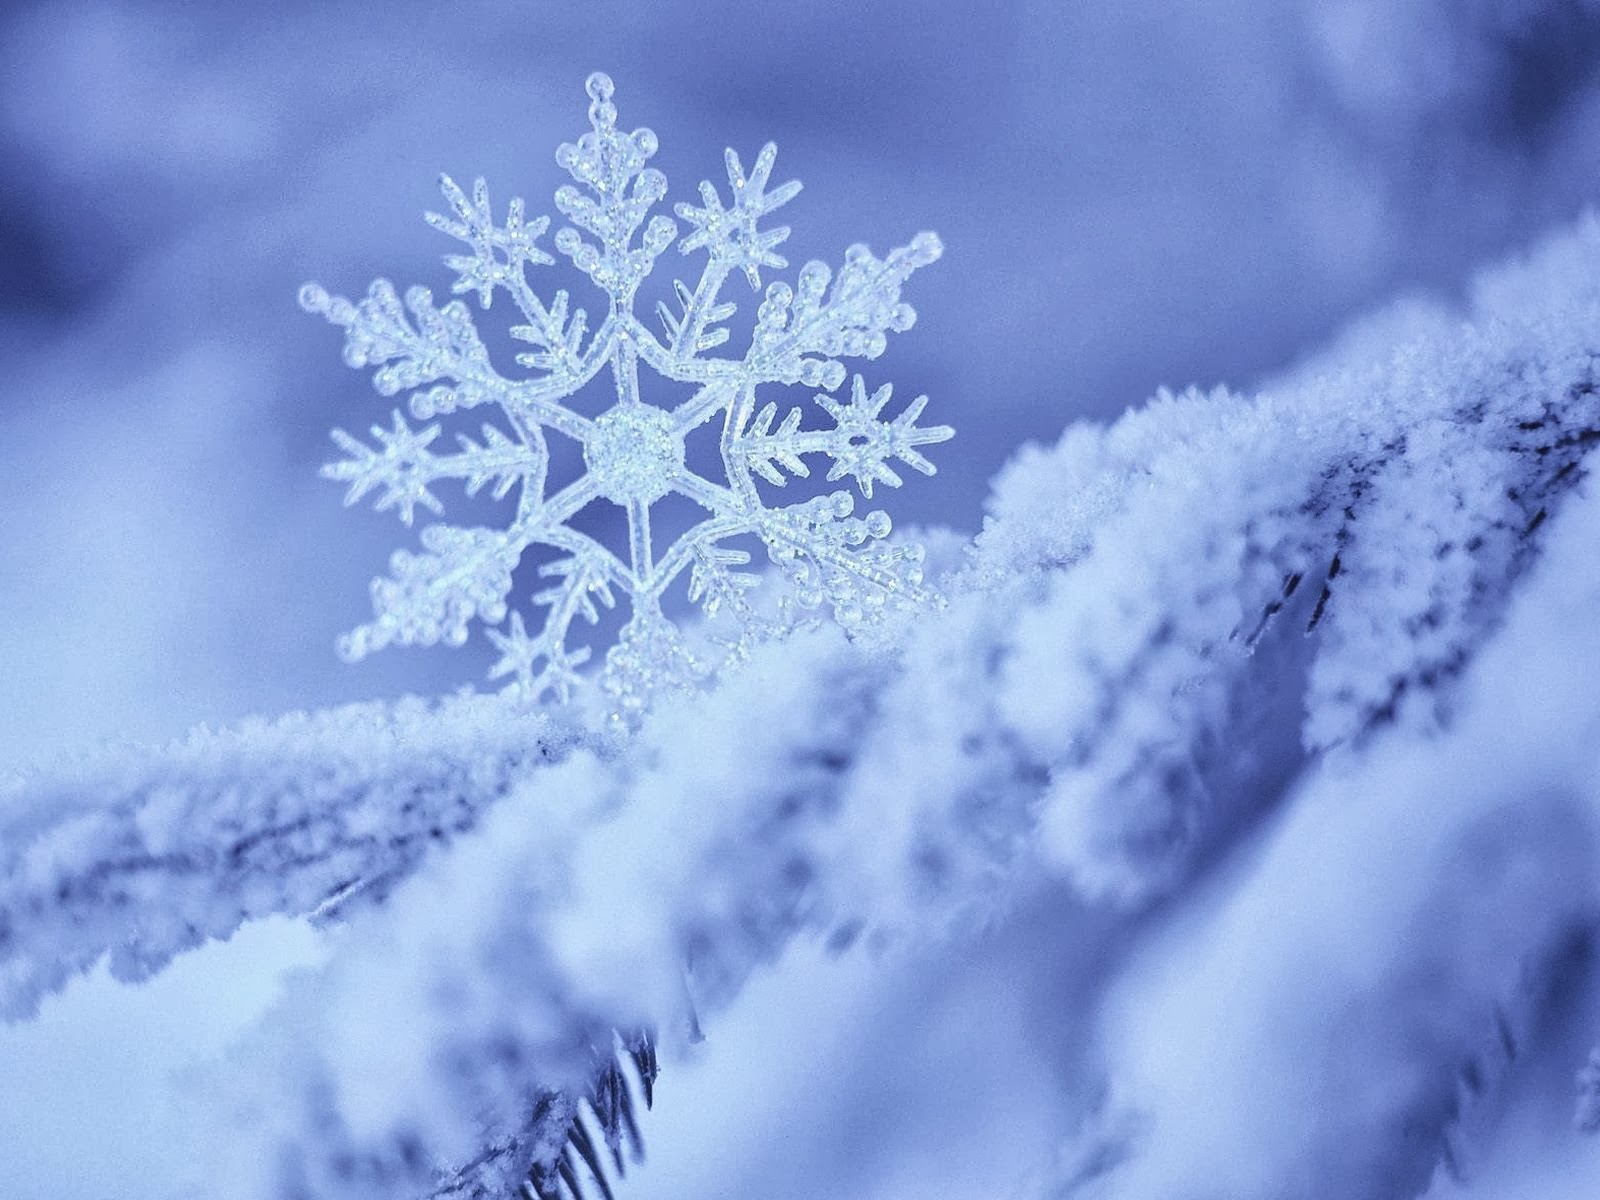 Winter Snowflake Wallpaper High Definition Quality